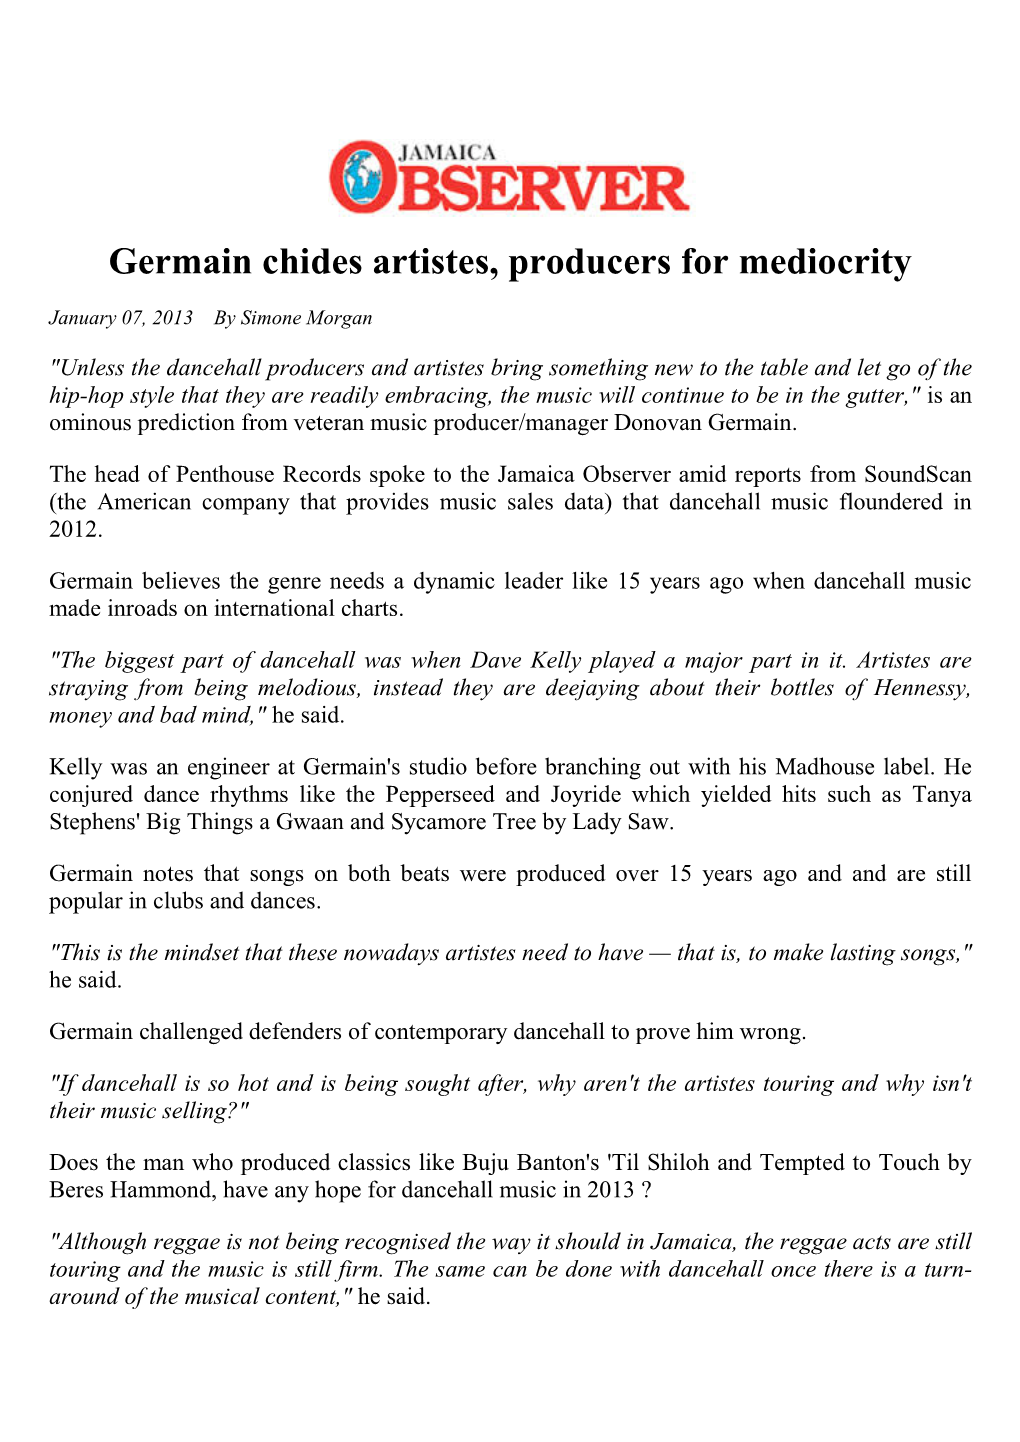 Germain Chides Artistes, Producers for Mediocrity